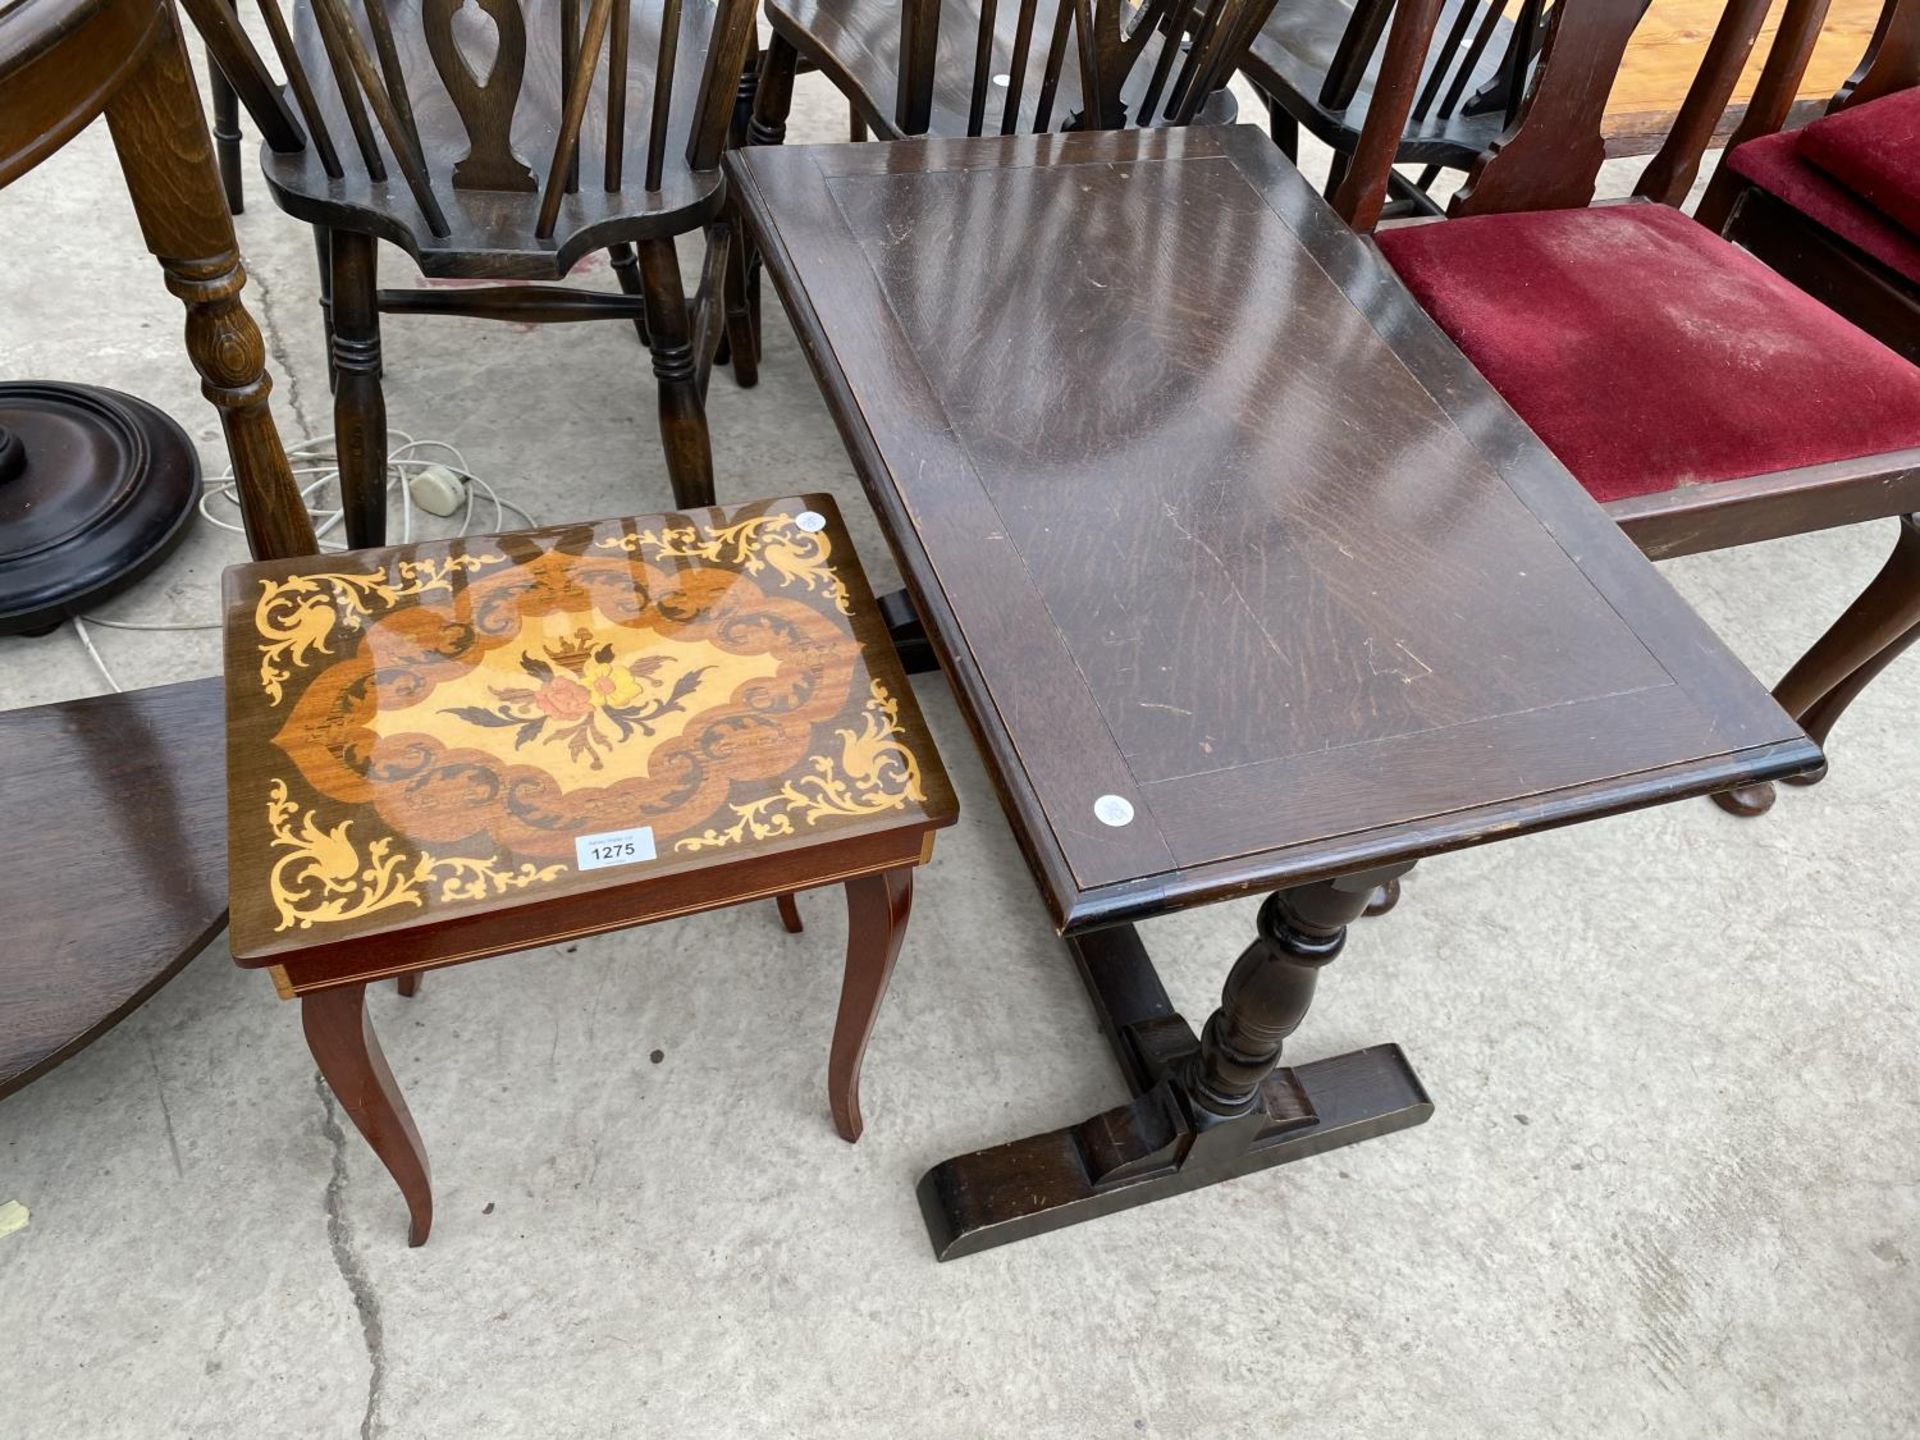 AN ITALIAN INLAID MAHOGANY SEWING TABLE WITH HINGED TOP AND A MAHOGANY COFFEE TABLE